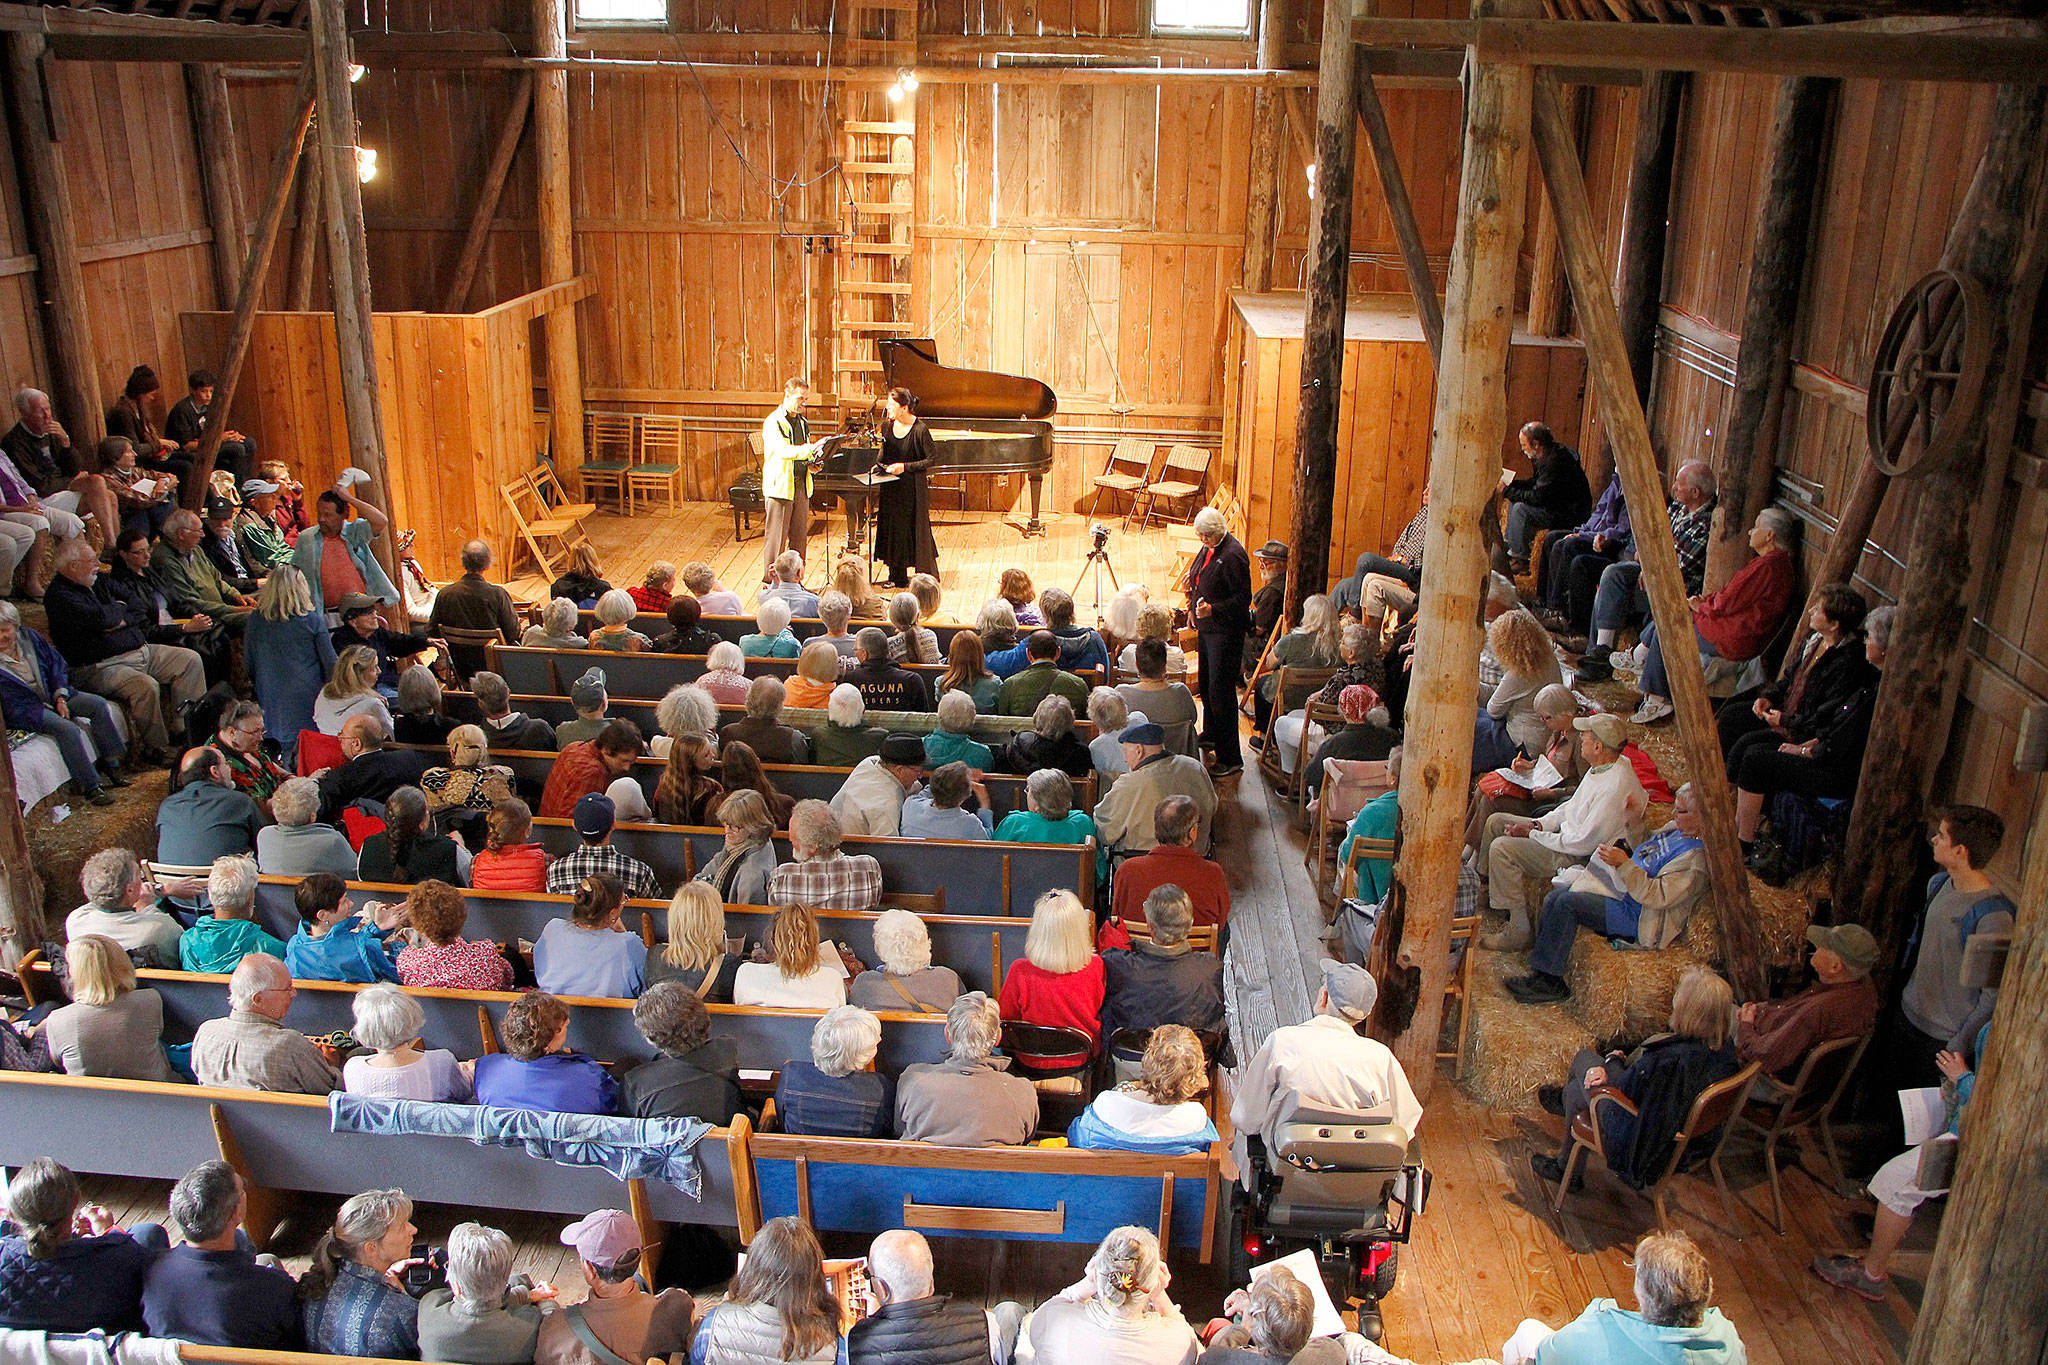 Alan Iglitzin’s historic barn in Quilcene will once again host chamber music concerts this summer.